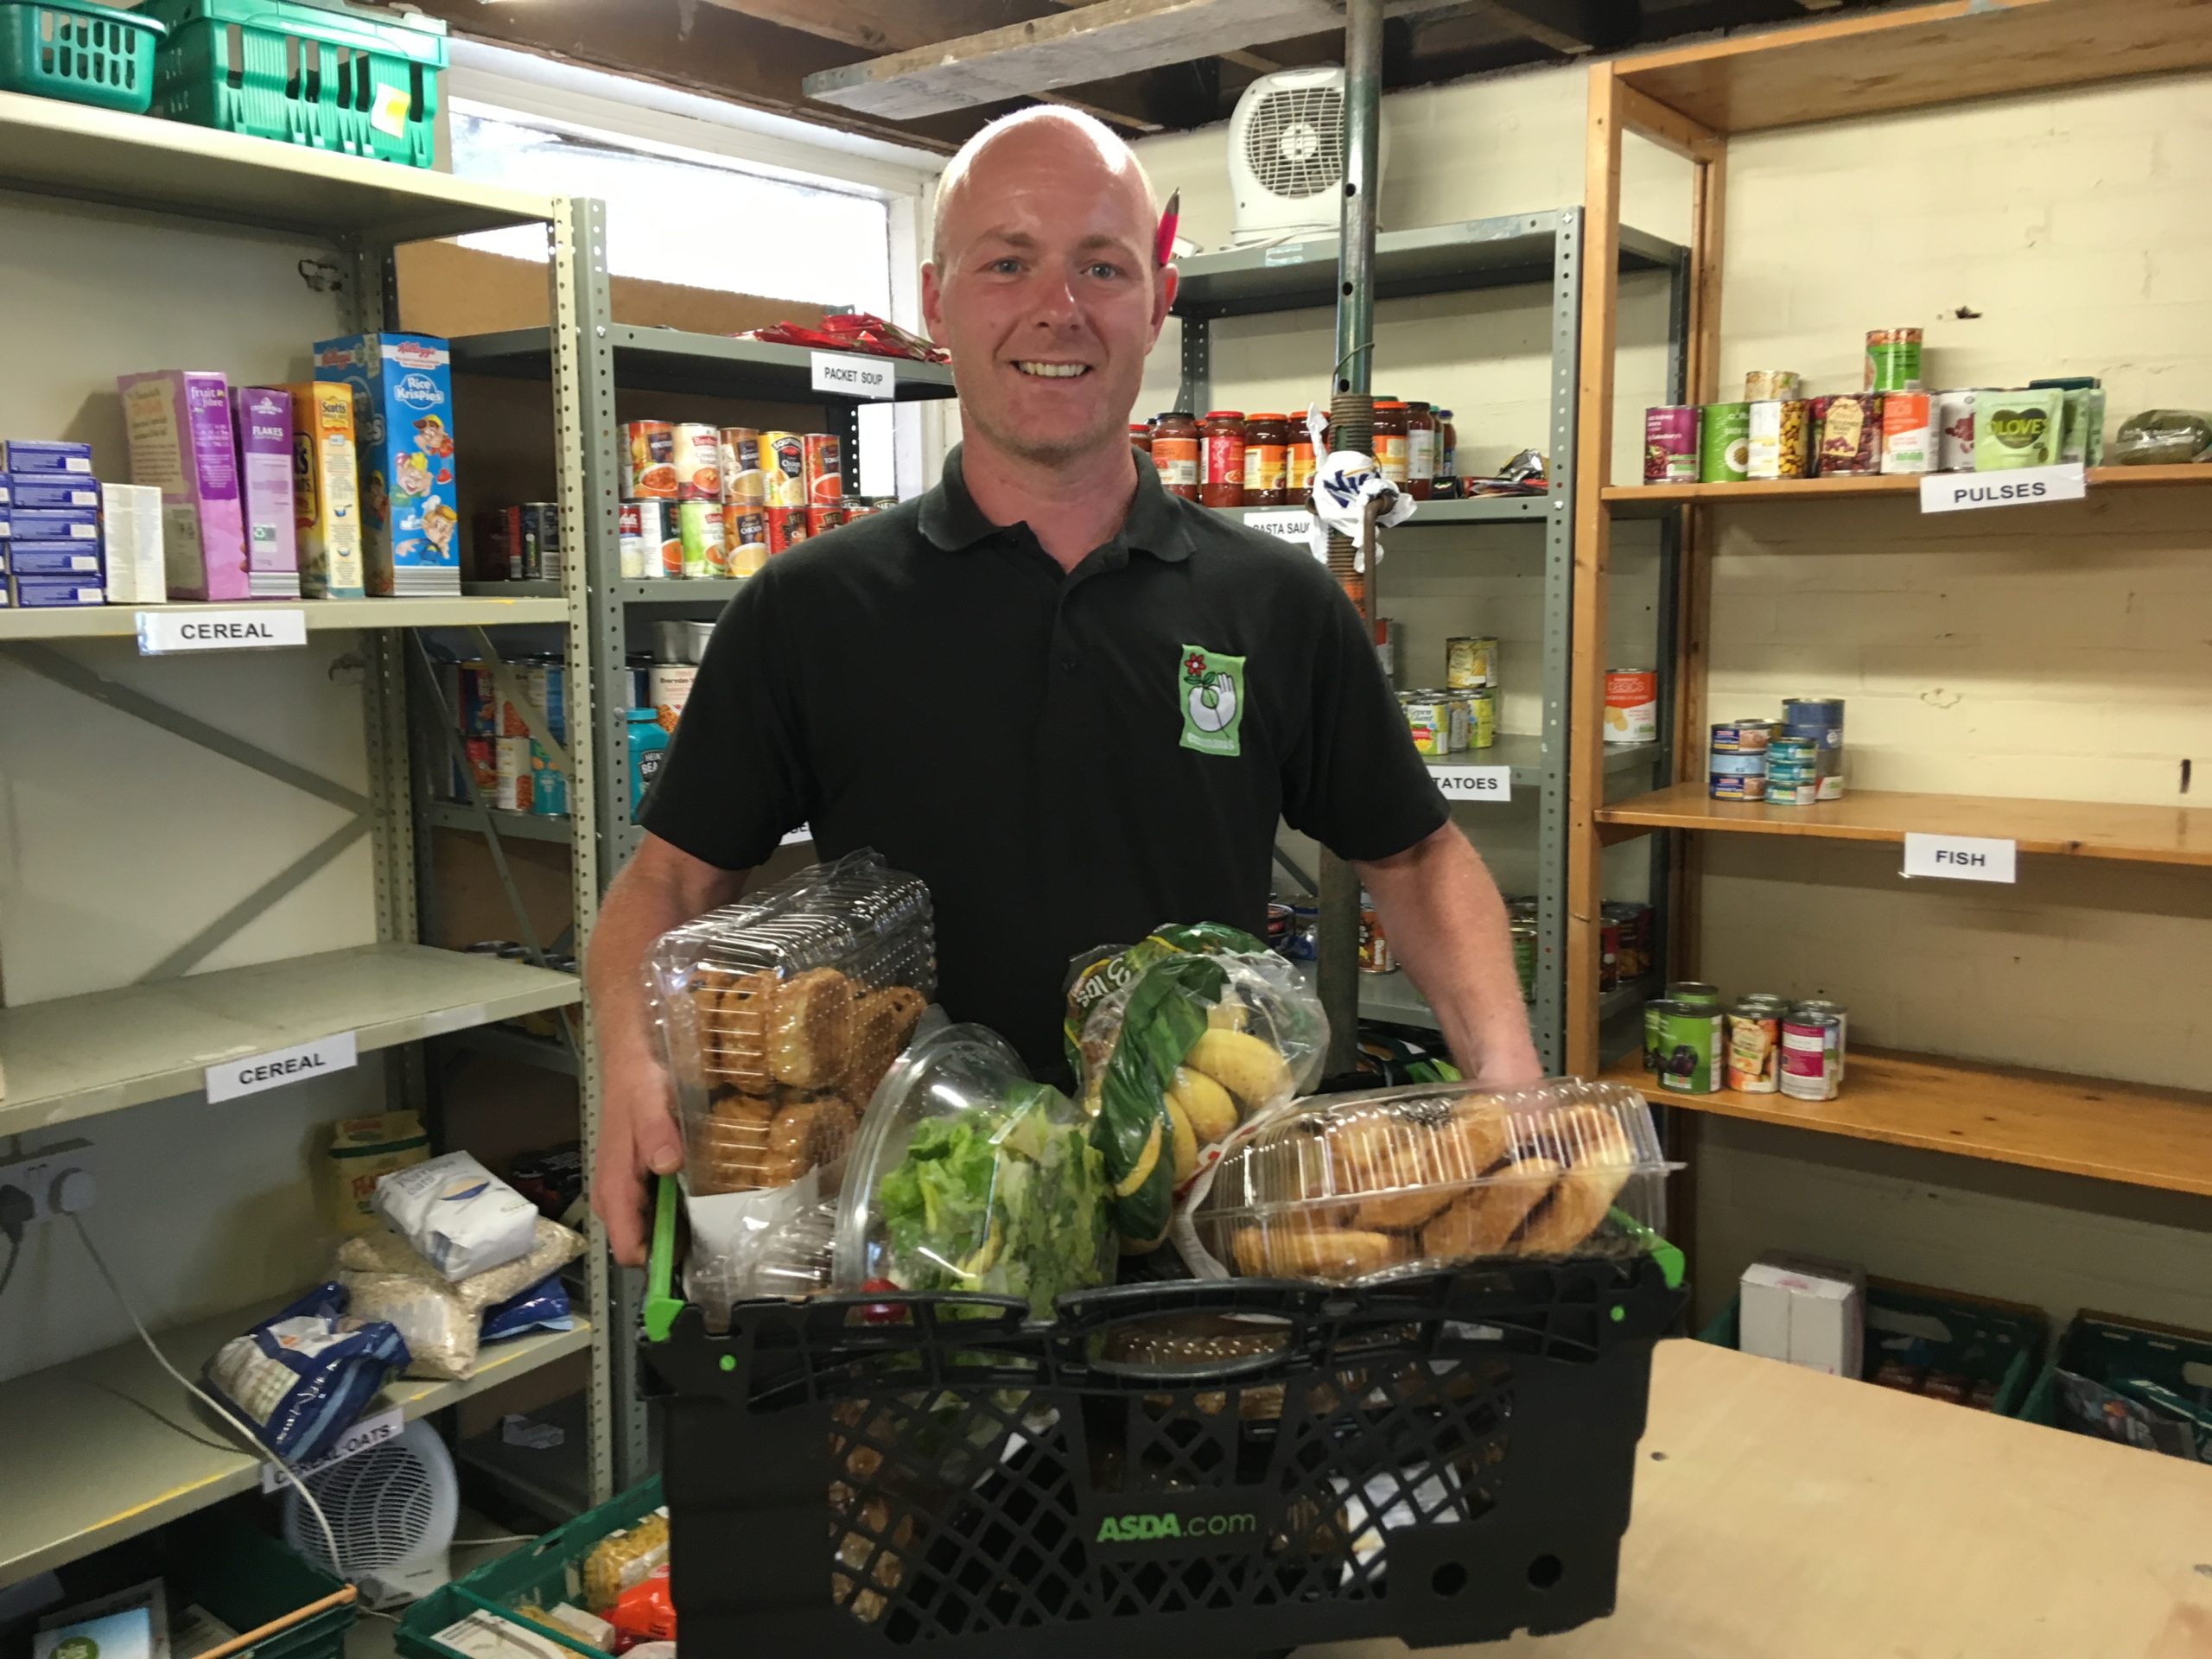 Emmaus Coventry & Warwickshire has been providing food to food banks for the past 10 years. The current need for ‘Helping Coventry’s Food Banks’ was identified through discussions with local food banks who were seeking support with replenishing their stock due to high demand.